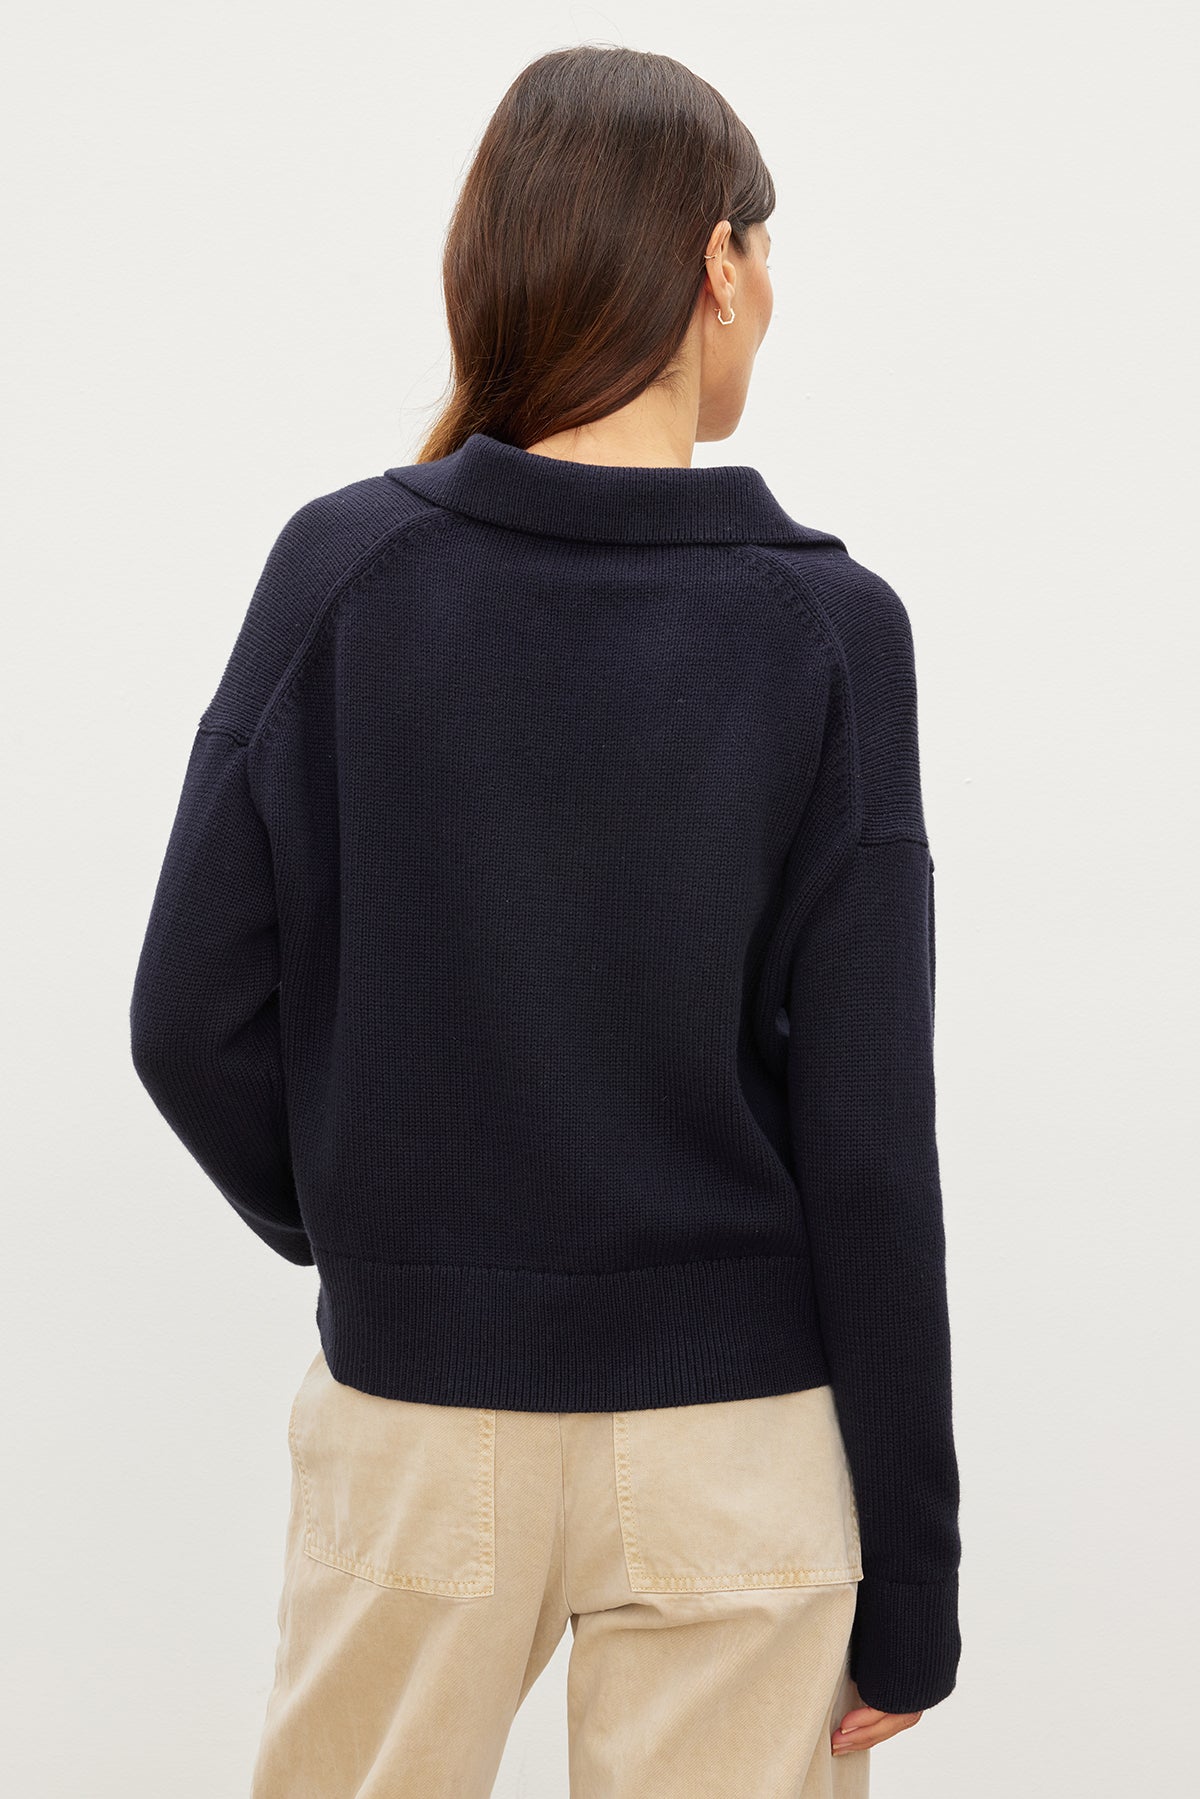   A woman in a LUCIE POLO SWEATER made of cotton/cashmere material, by Velvet by Graham & Spencer. 